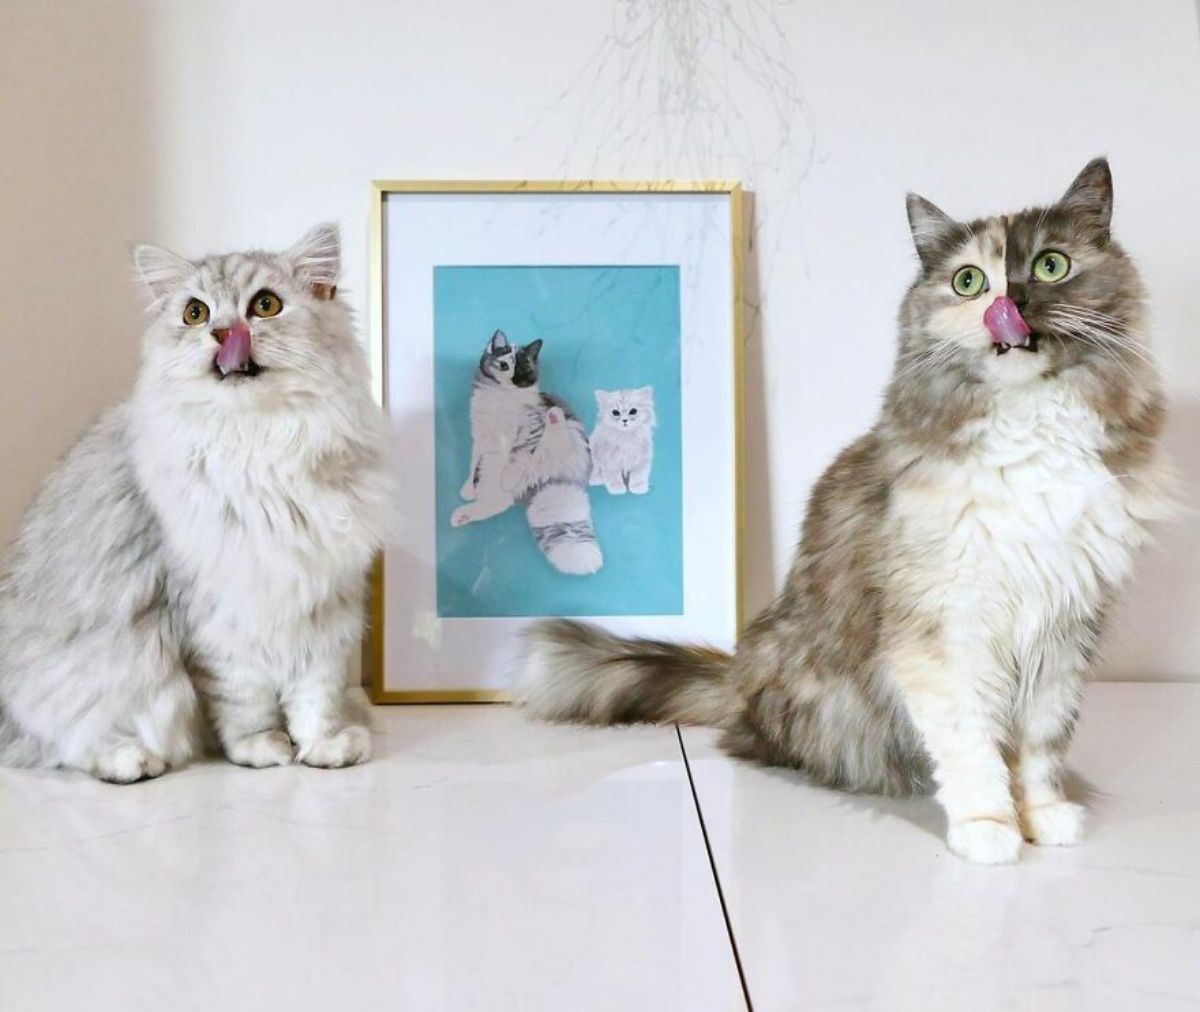 fluffy cat with right side of face being grey and left side being black posing with a fluffy white and grey cat with a painting of them in the middle